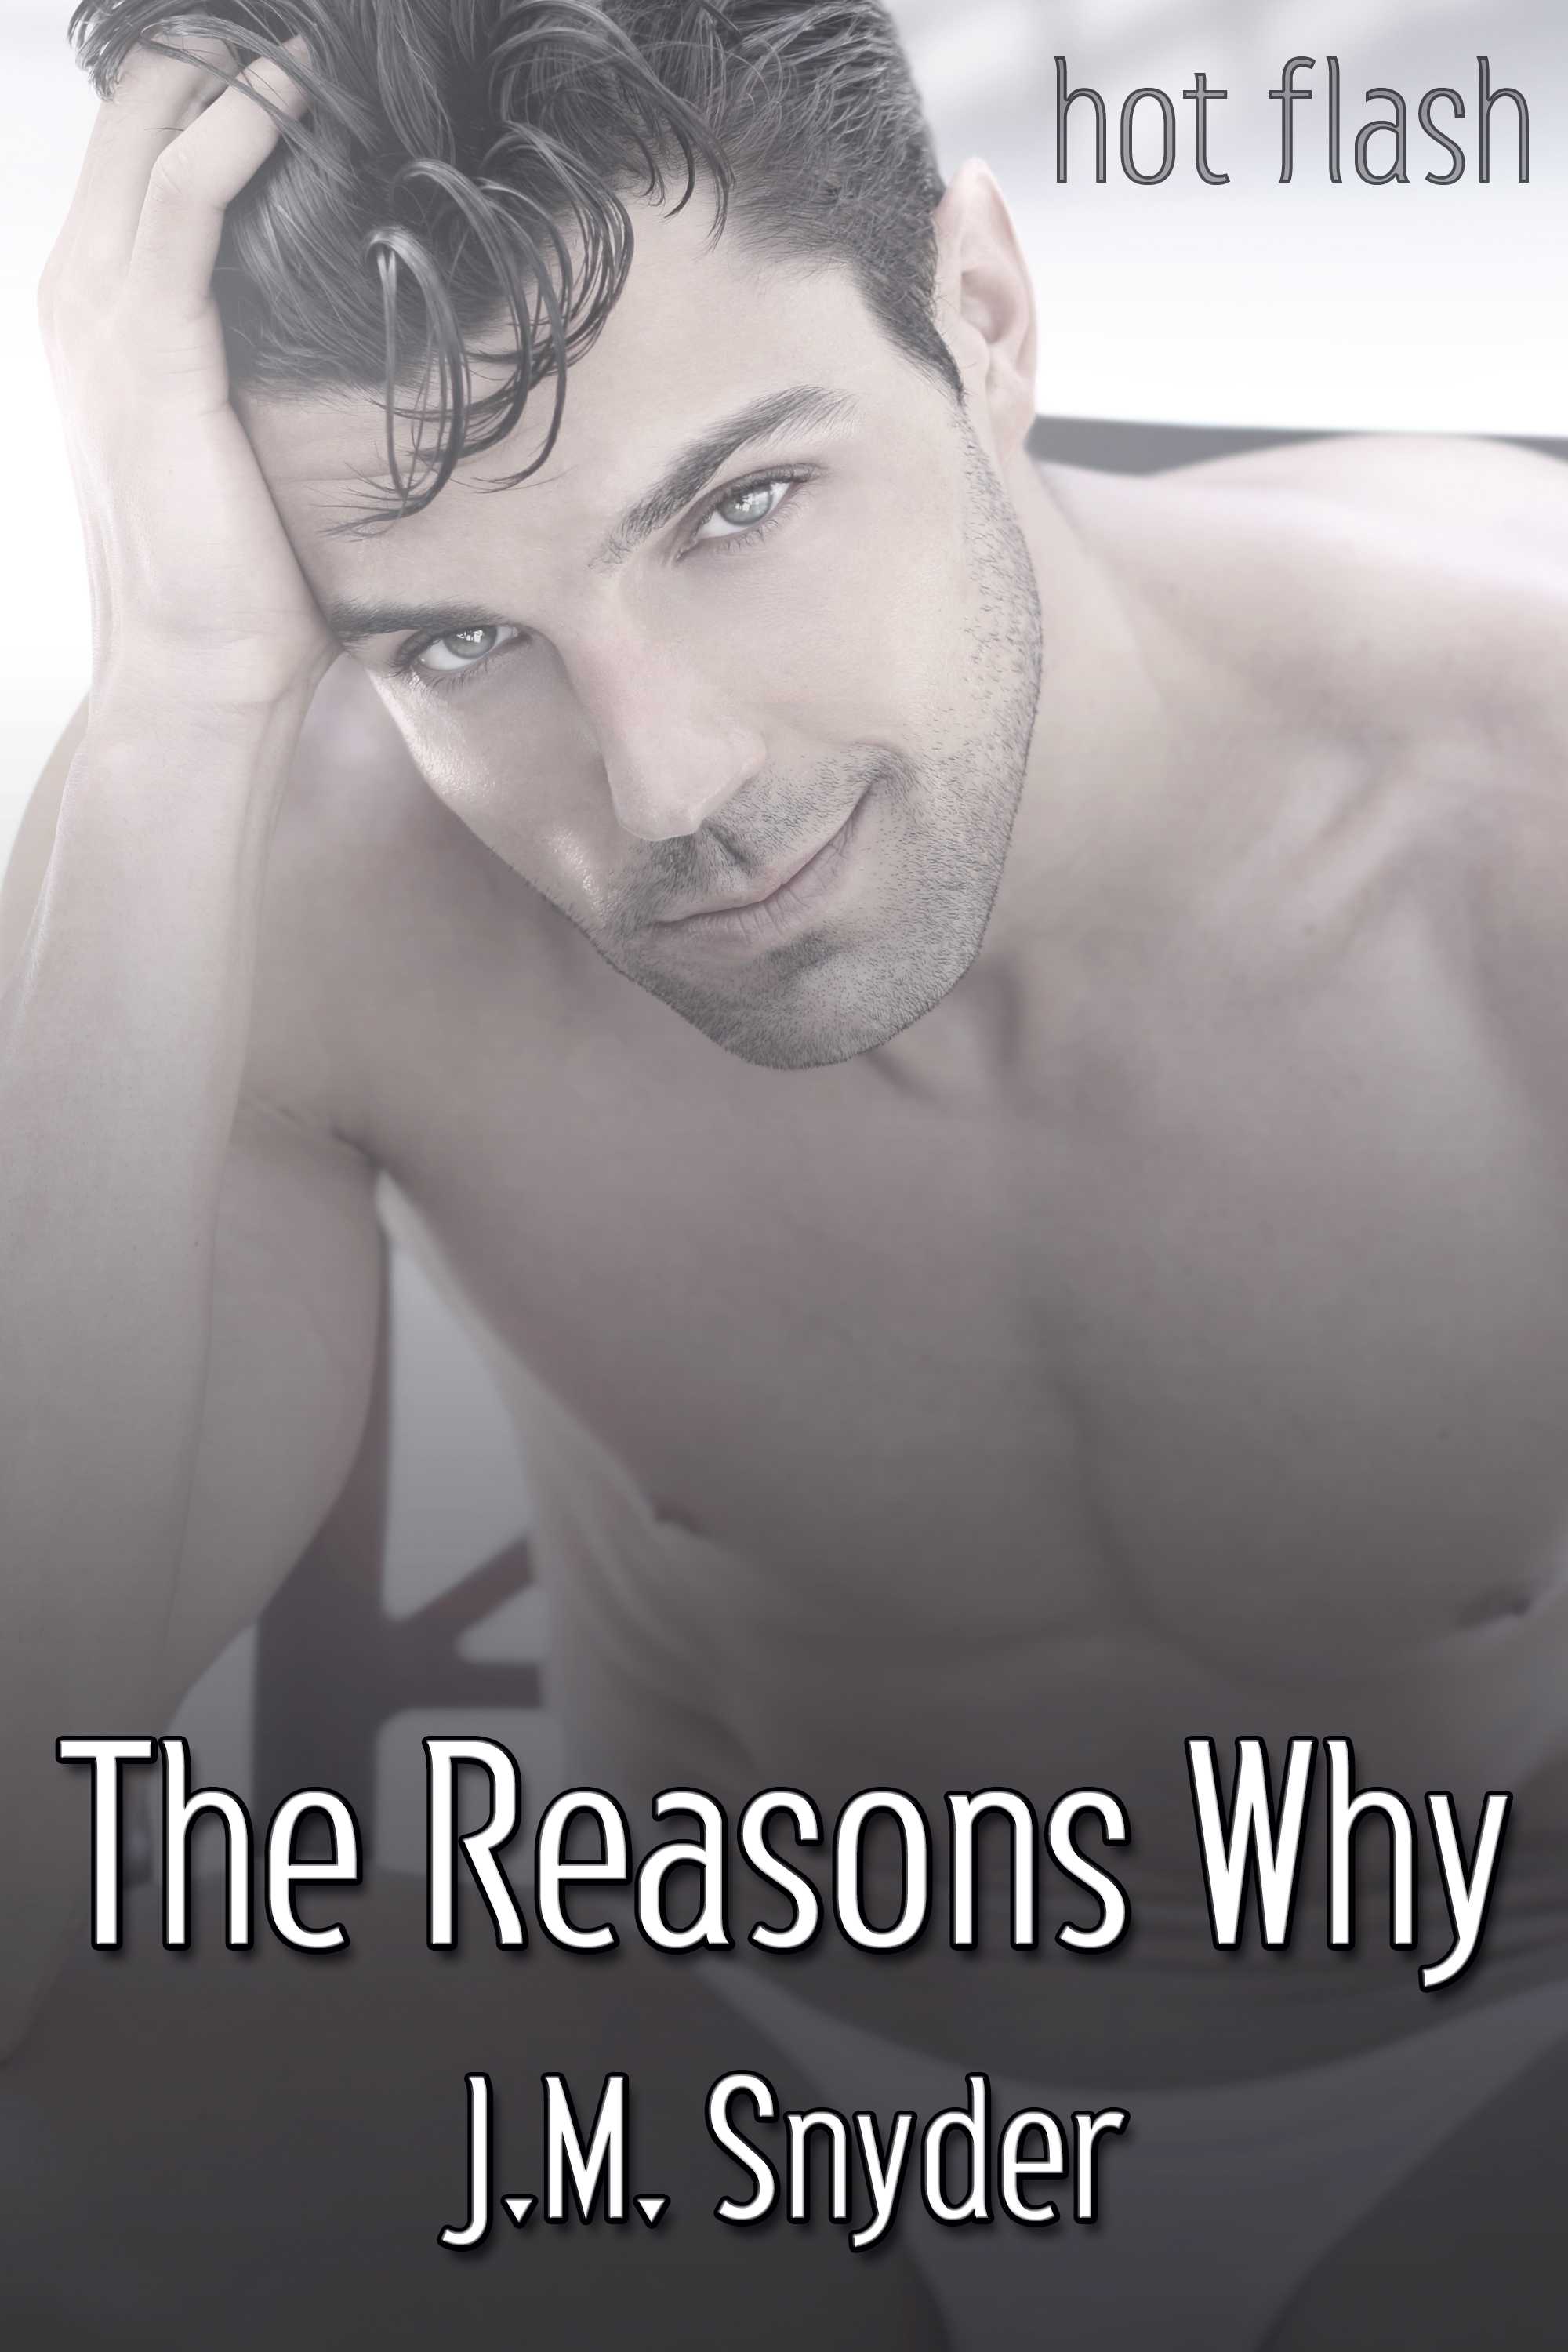 This image is the cover for the book The Reasons Why, Hot Flash